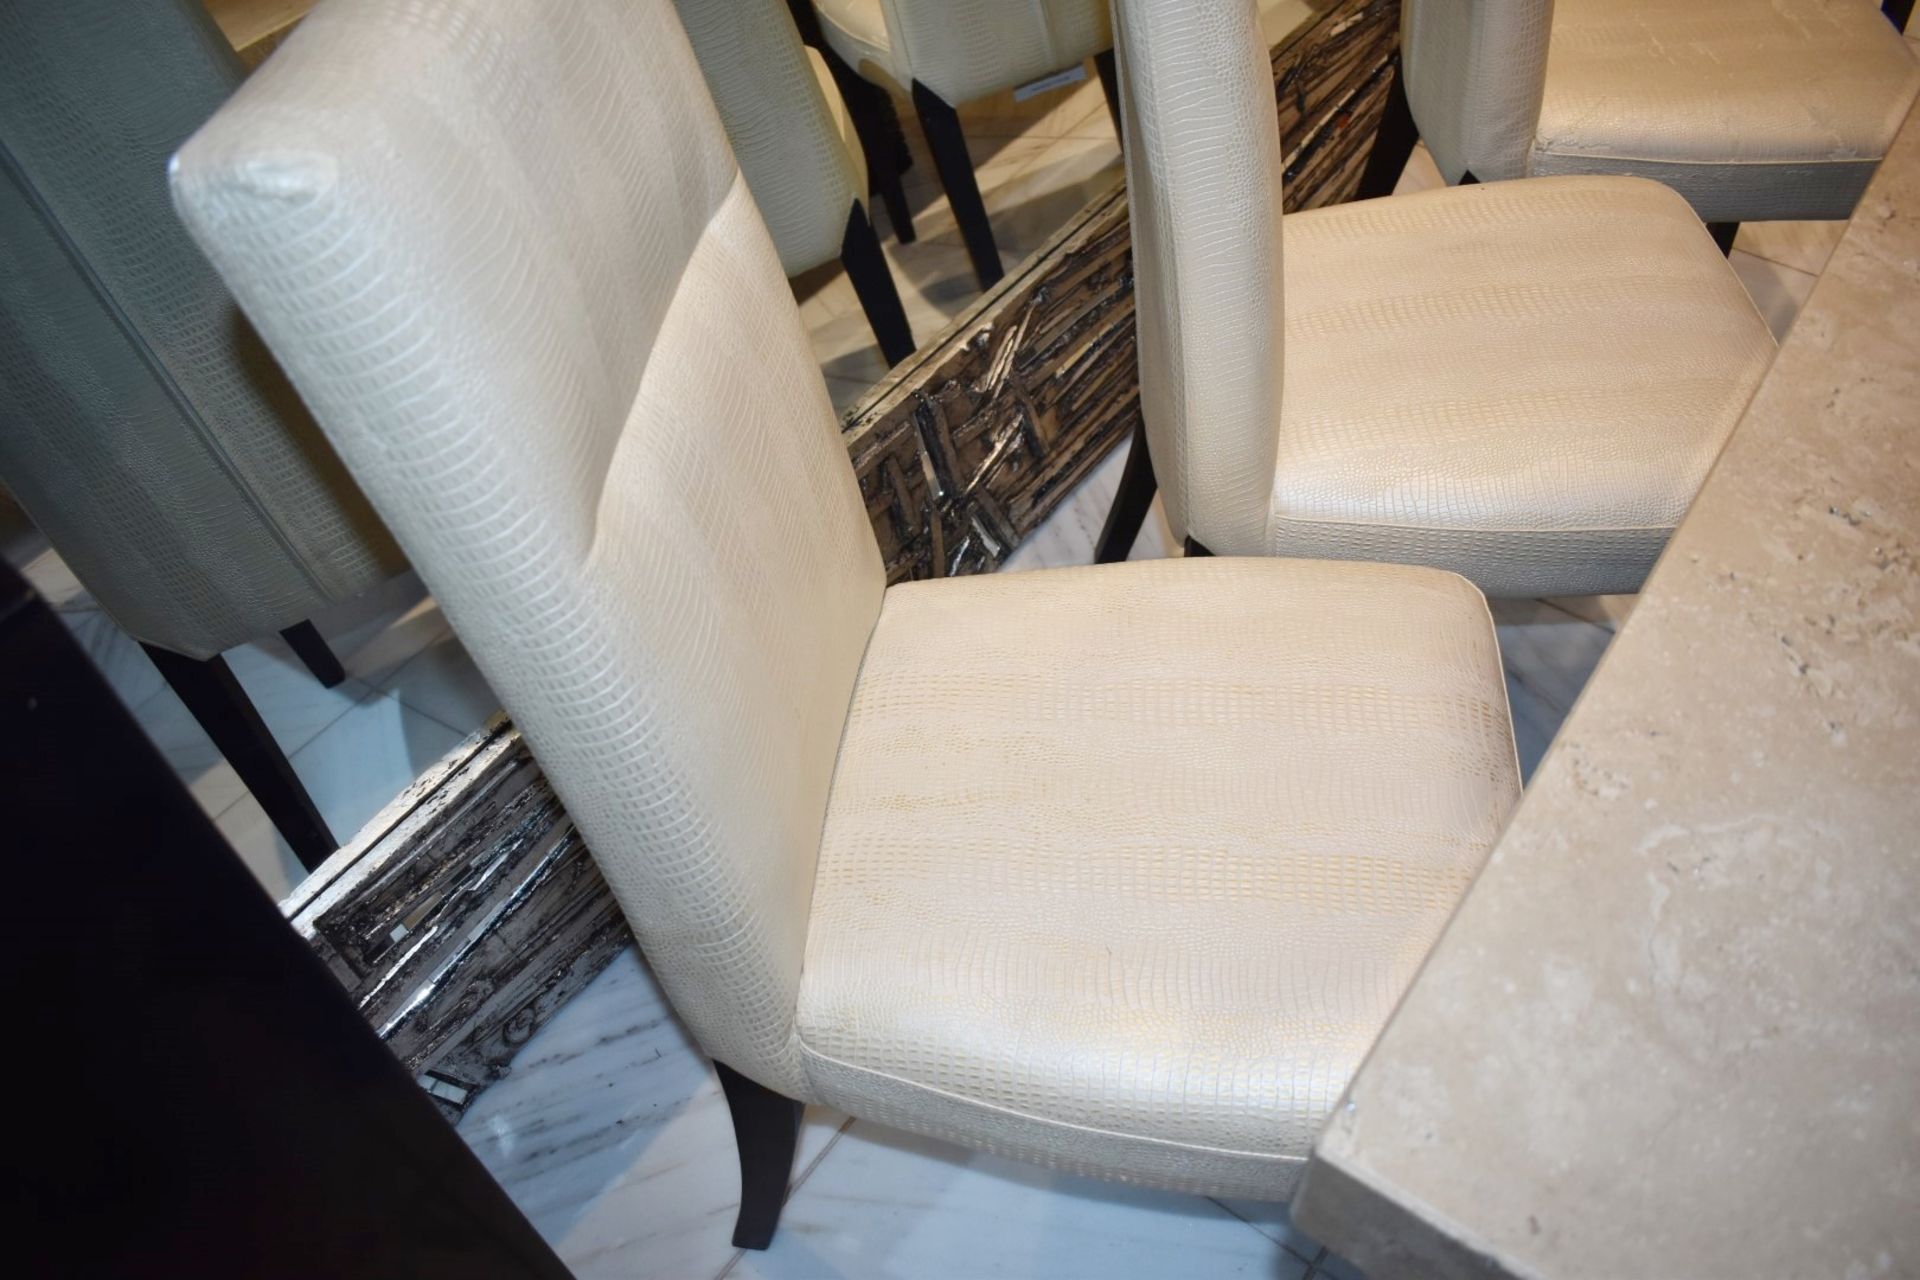 8 x High Back Dining Chairs Upholstered in Faux Crocodile Material - CL546 - Location: Hale, - Image 8 of 9